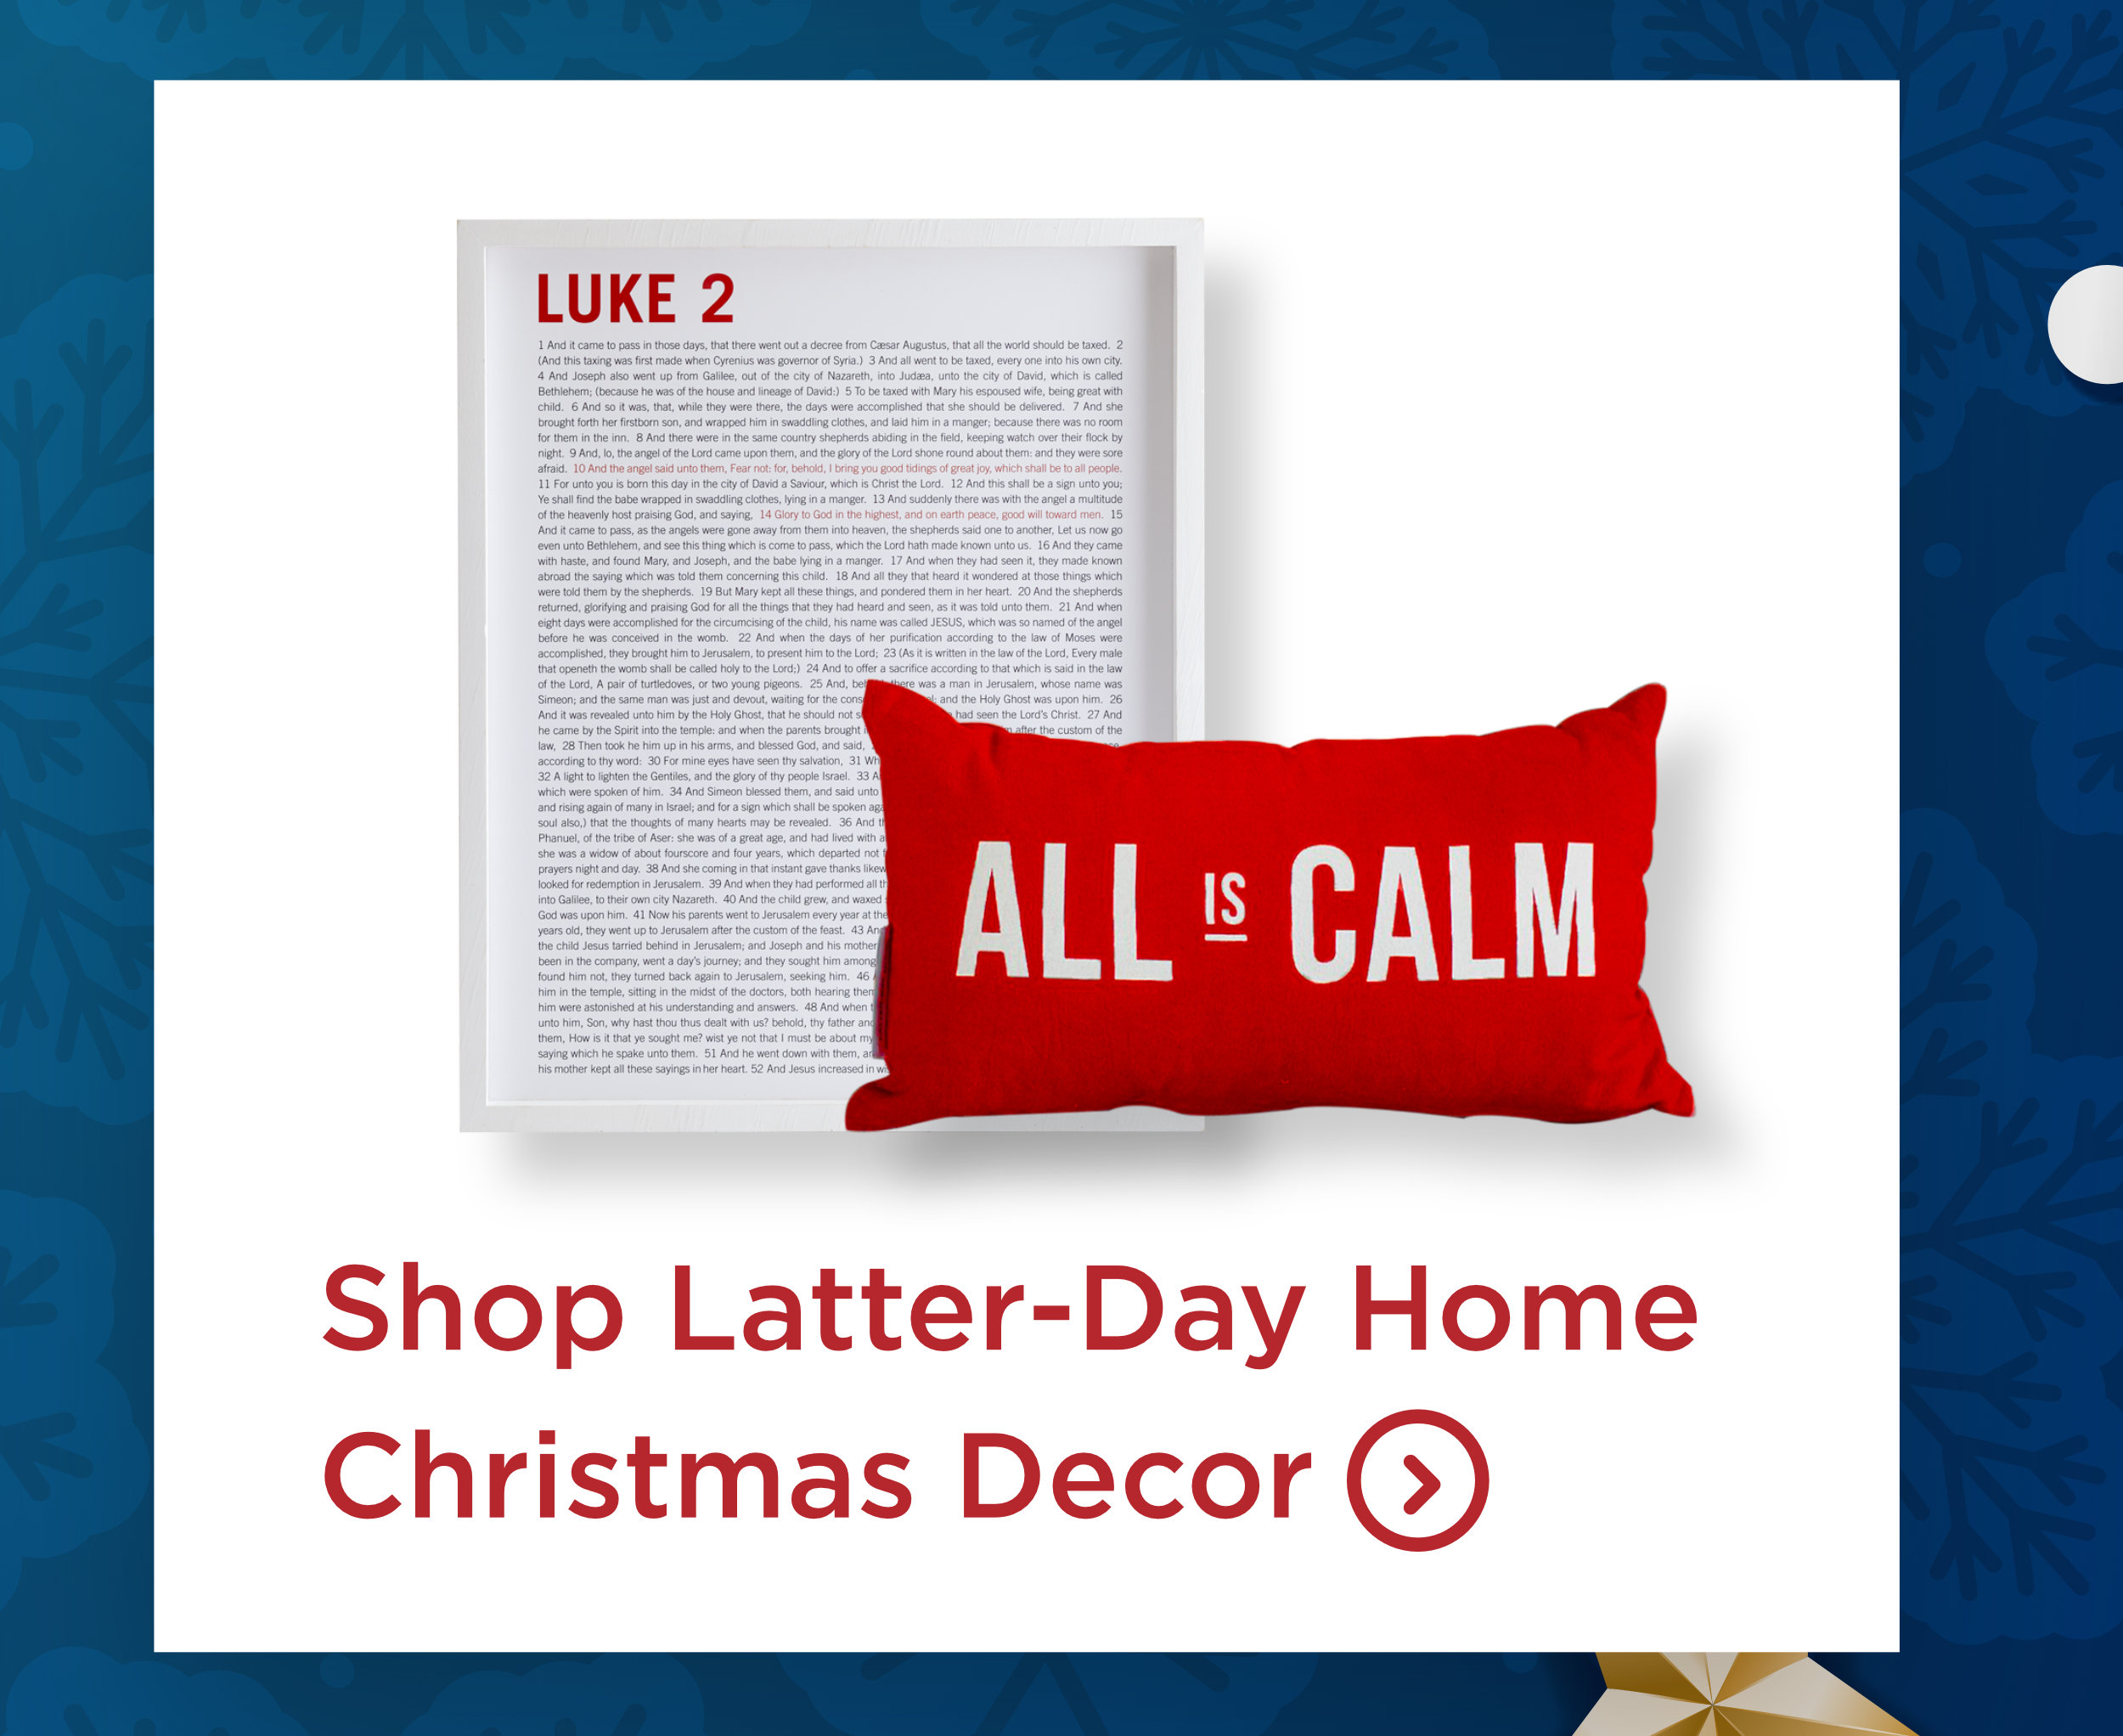 Get 20% off Latter-Day Home Christmas Decor